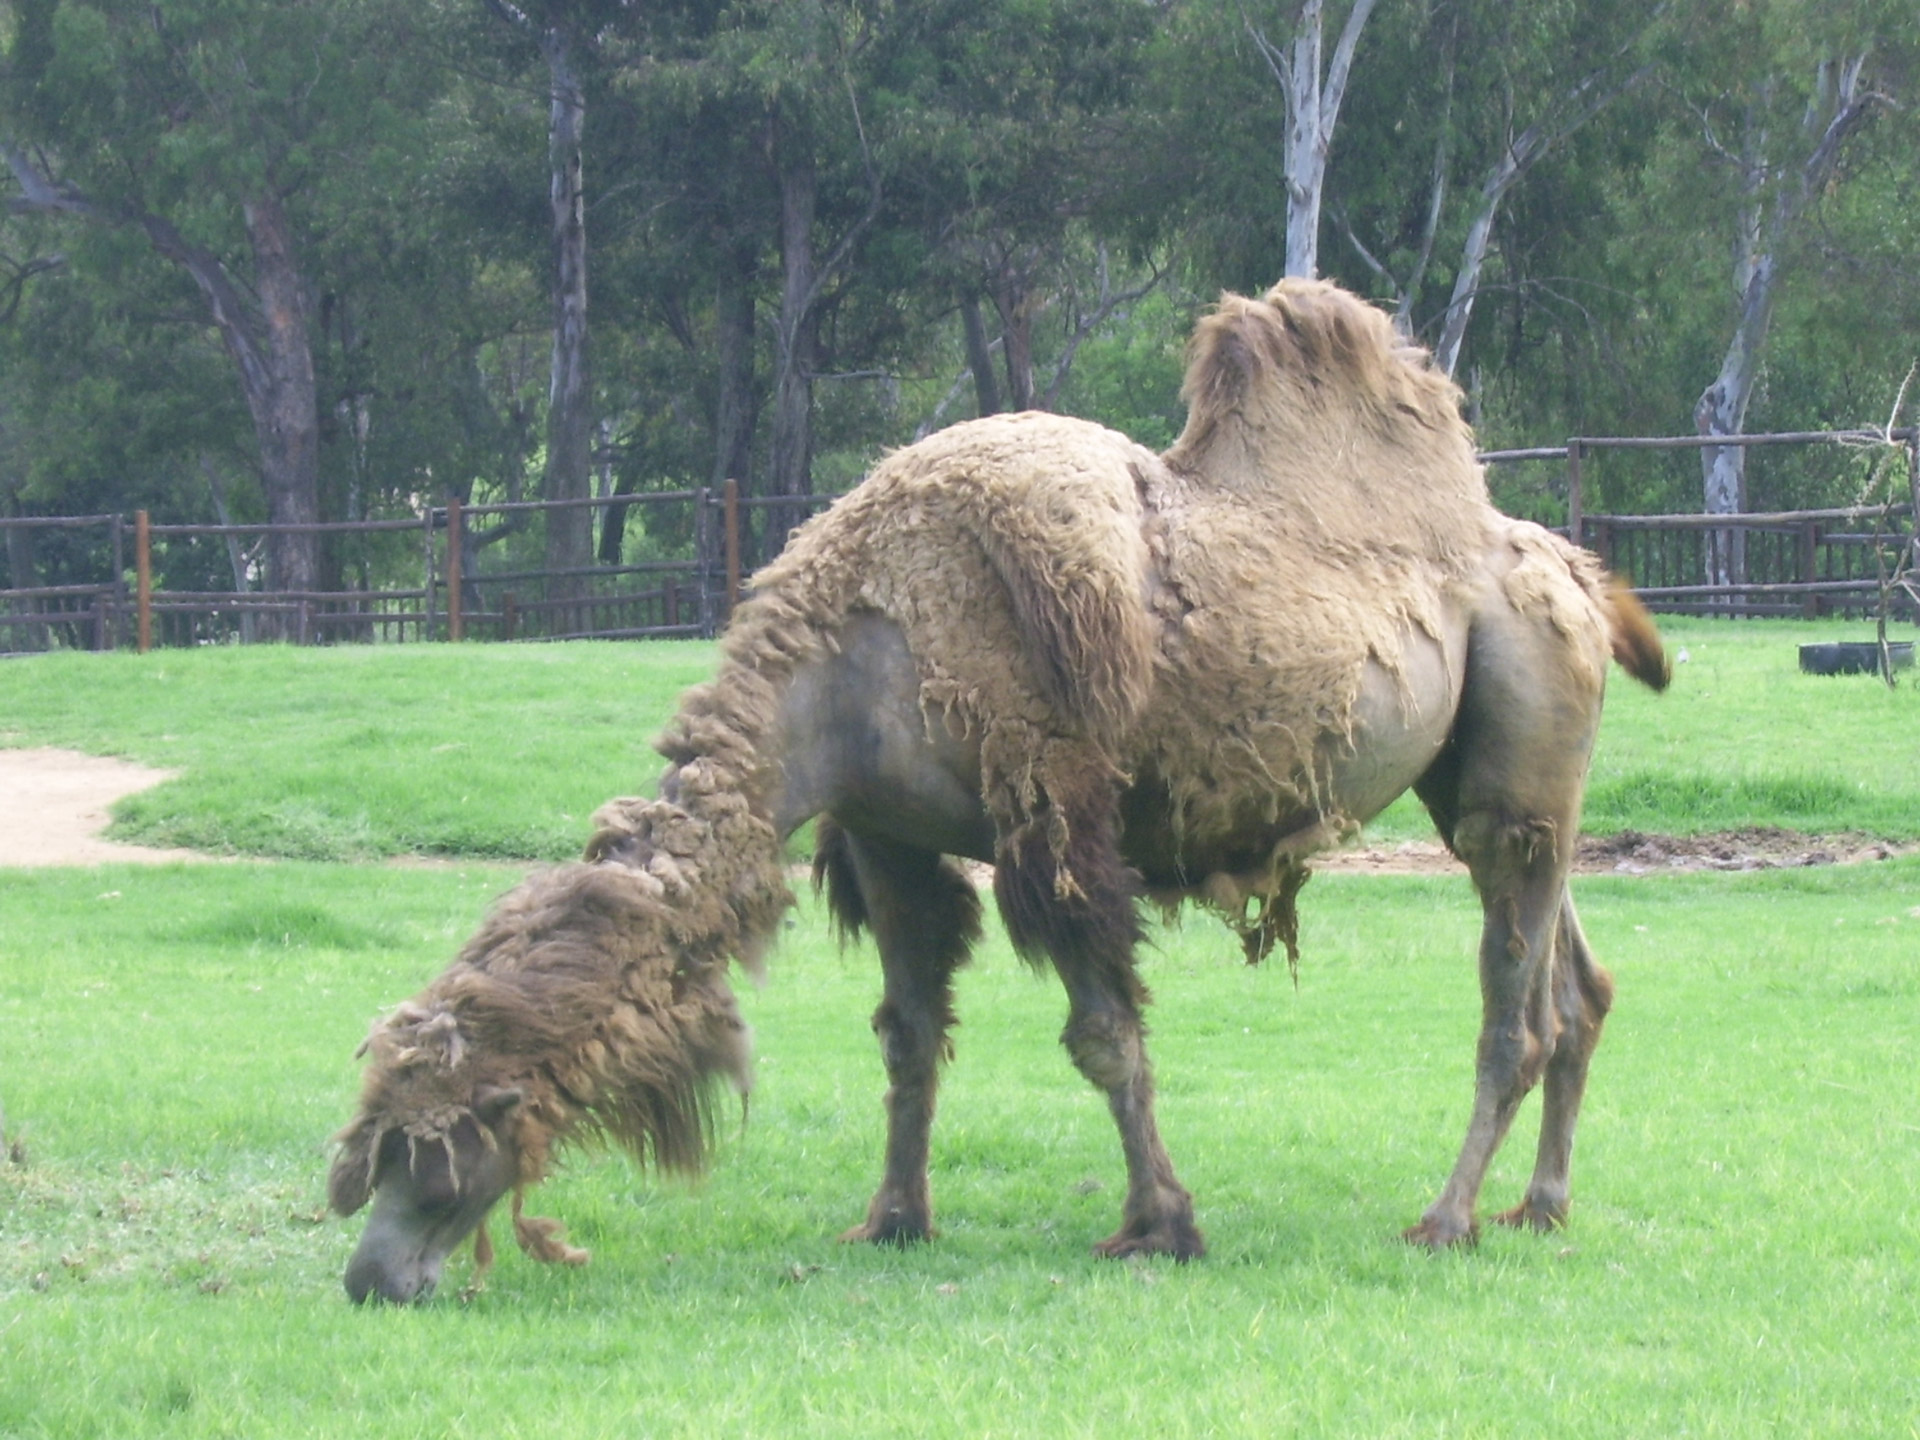 File:Camels at Camel Research Farm, Bikaner.jpg - Wikimedia Commons